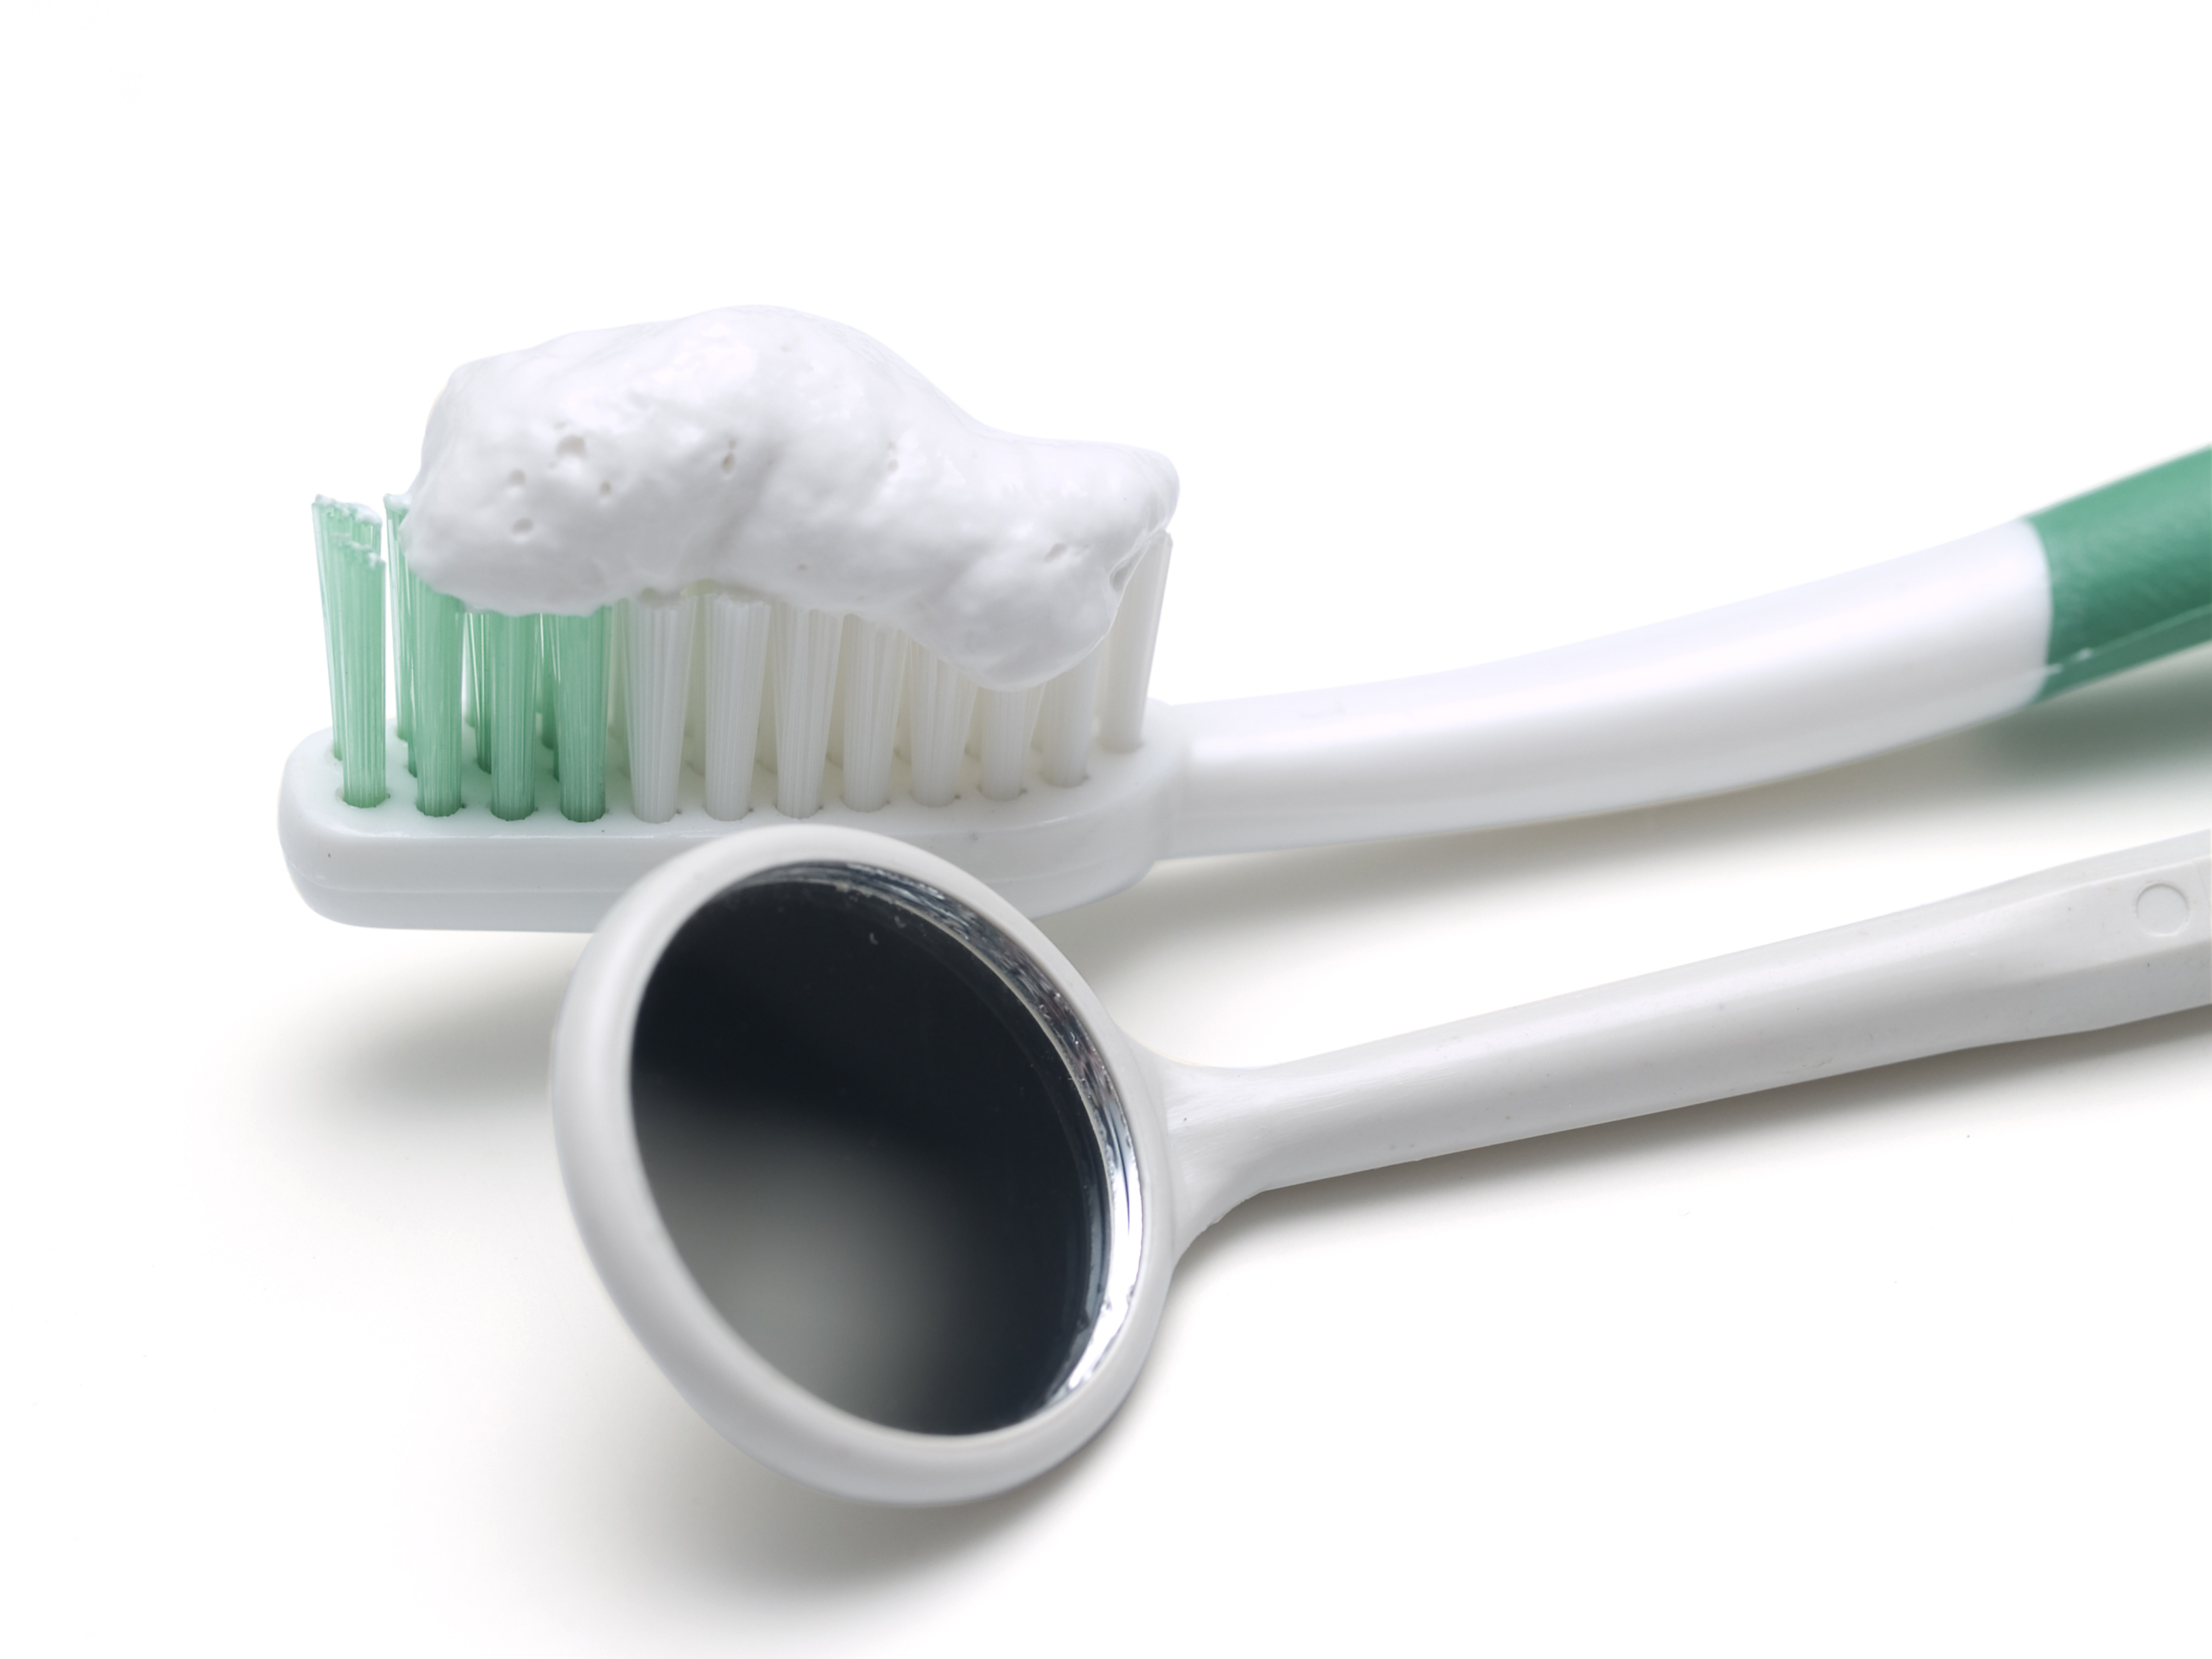 Toothbrush with toothpaste and dental mirror